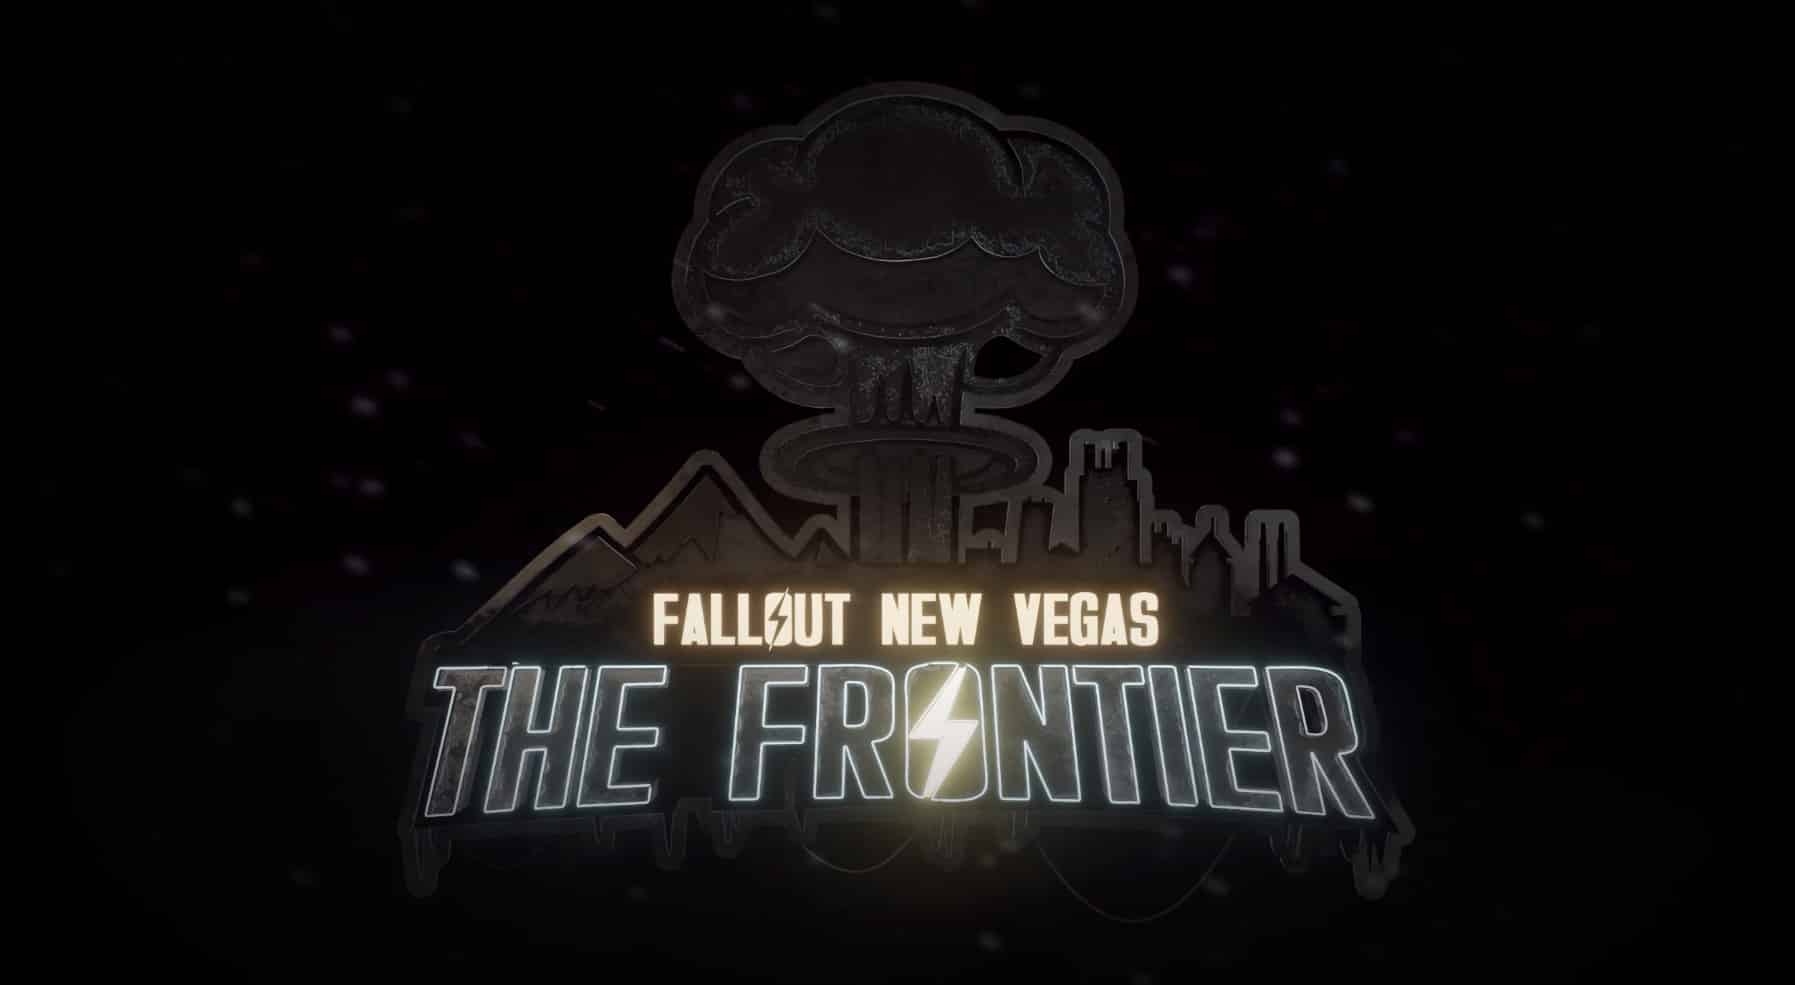 Fallout: The Frontier goes offline after modder accused of sharing  animated paedophilic content